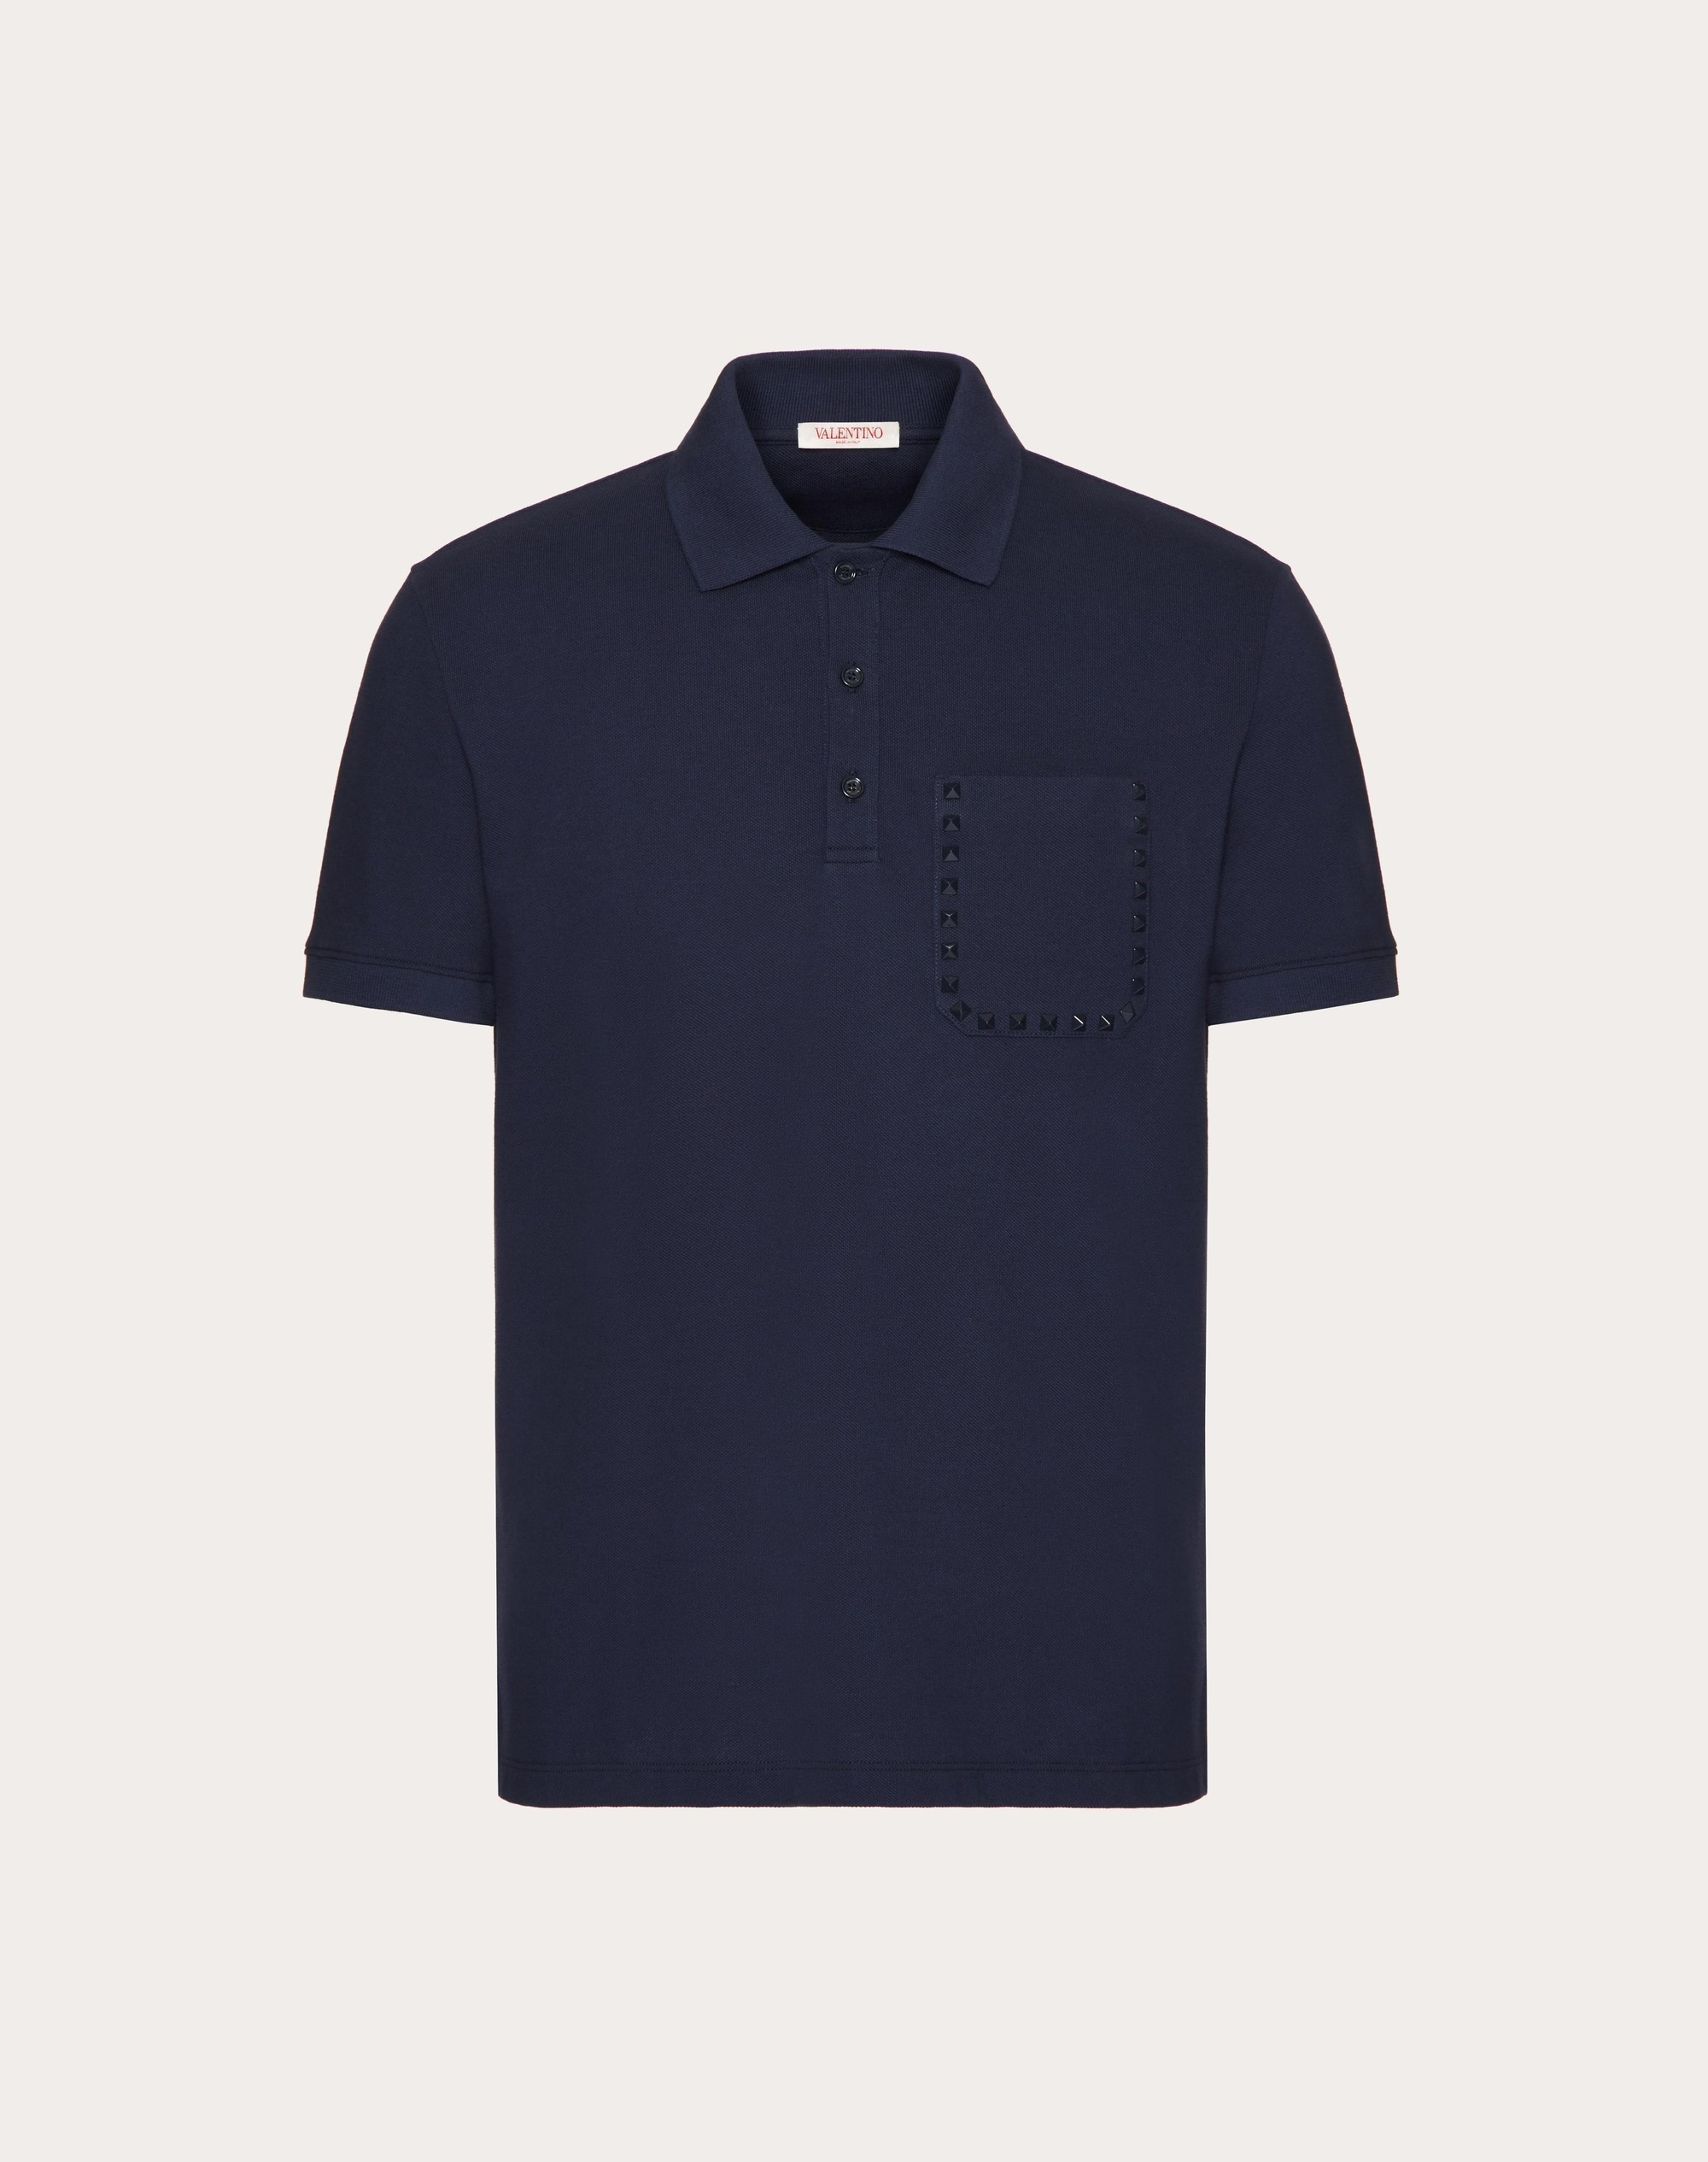 COTTON PIQUÉ POLO SHIRT WITH ROCKSTUD UNTITLED STUDS - 1